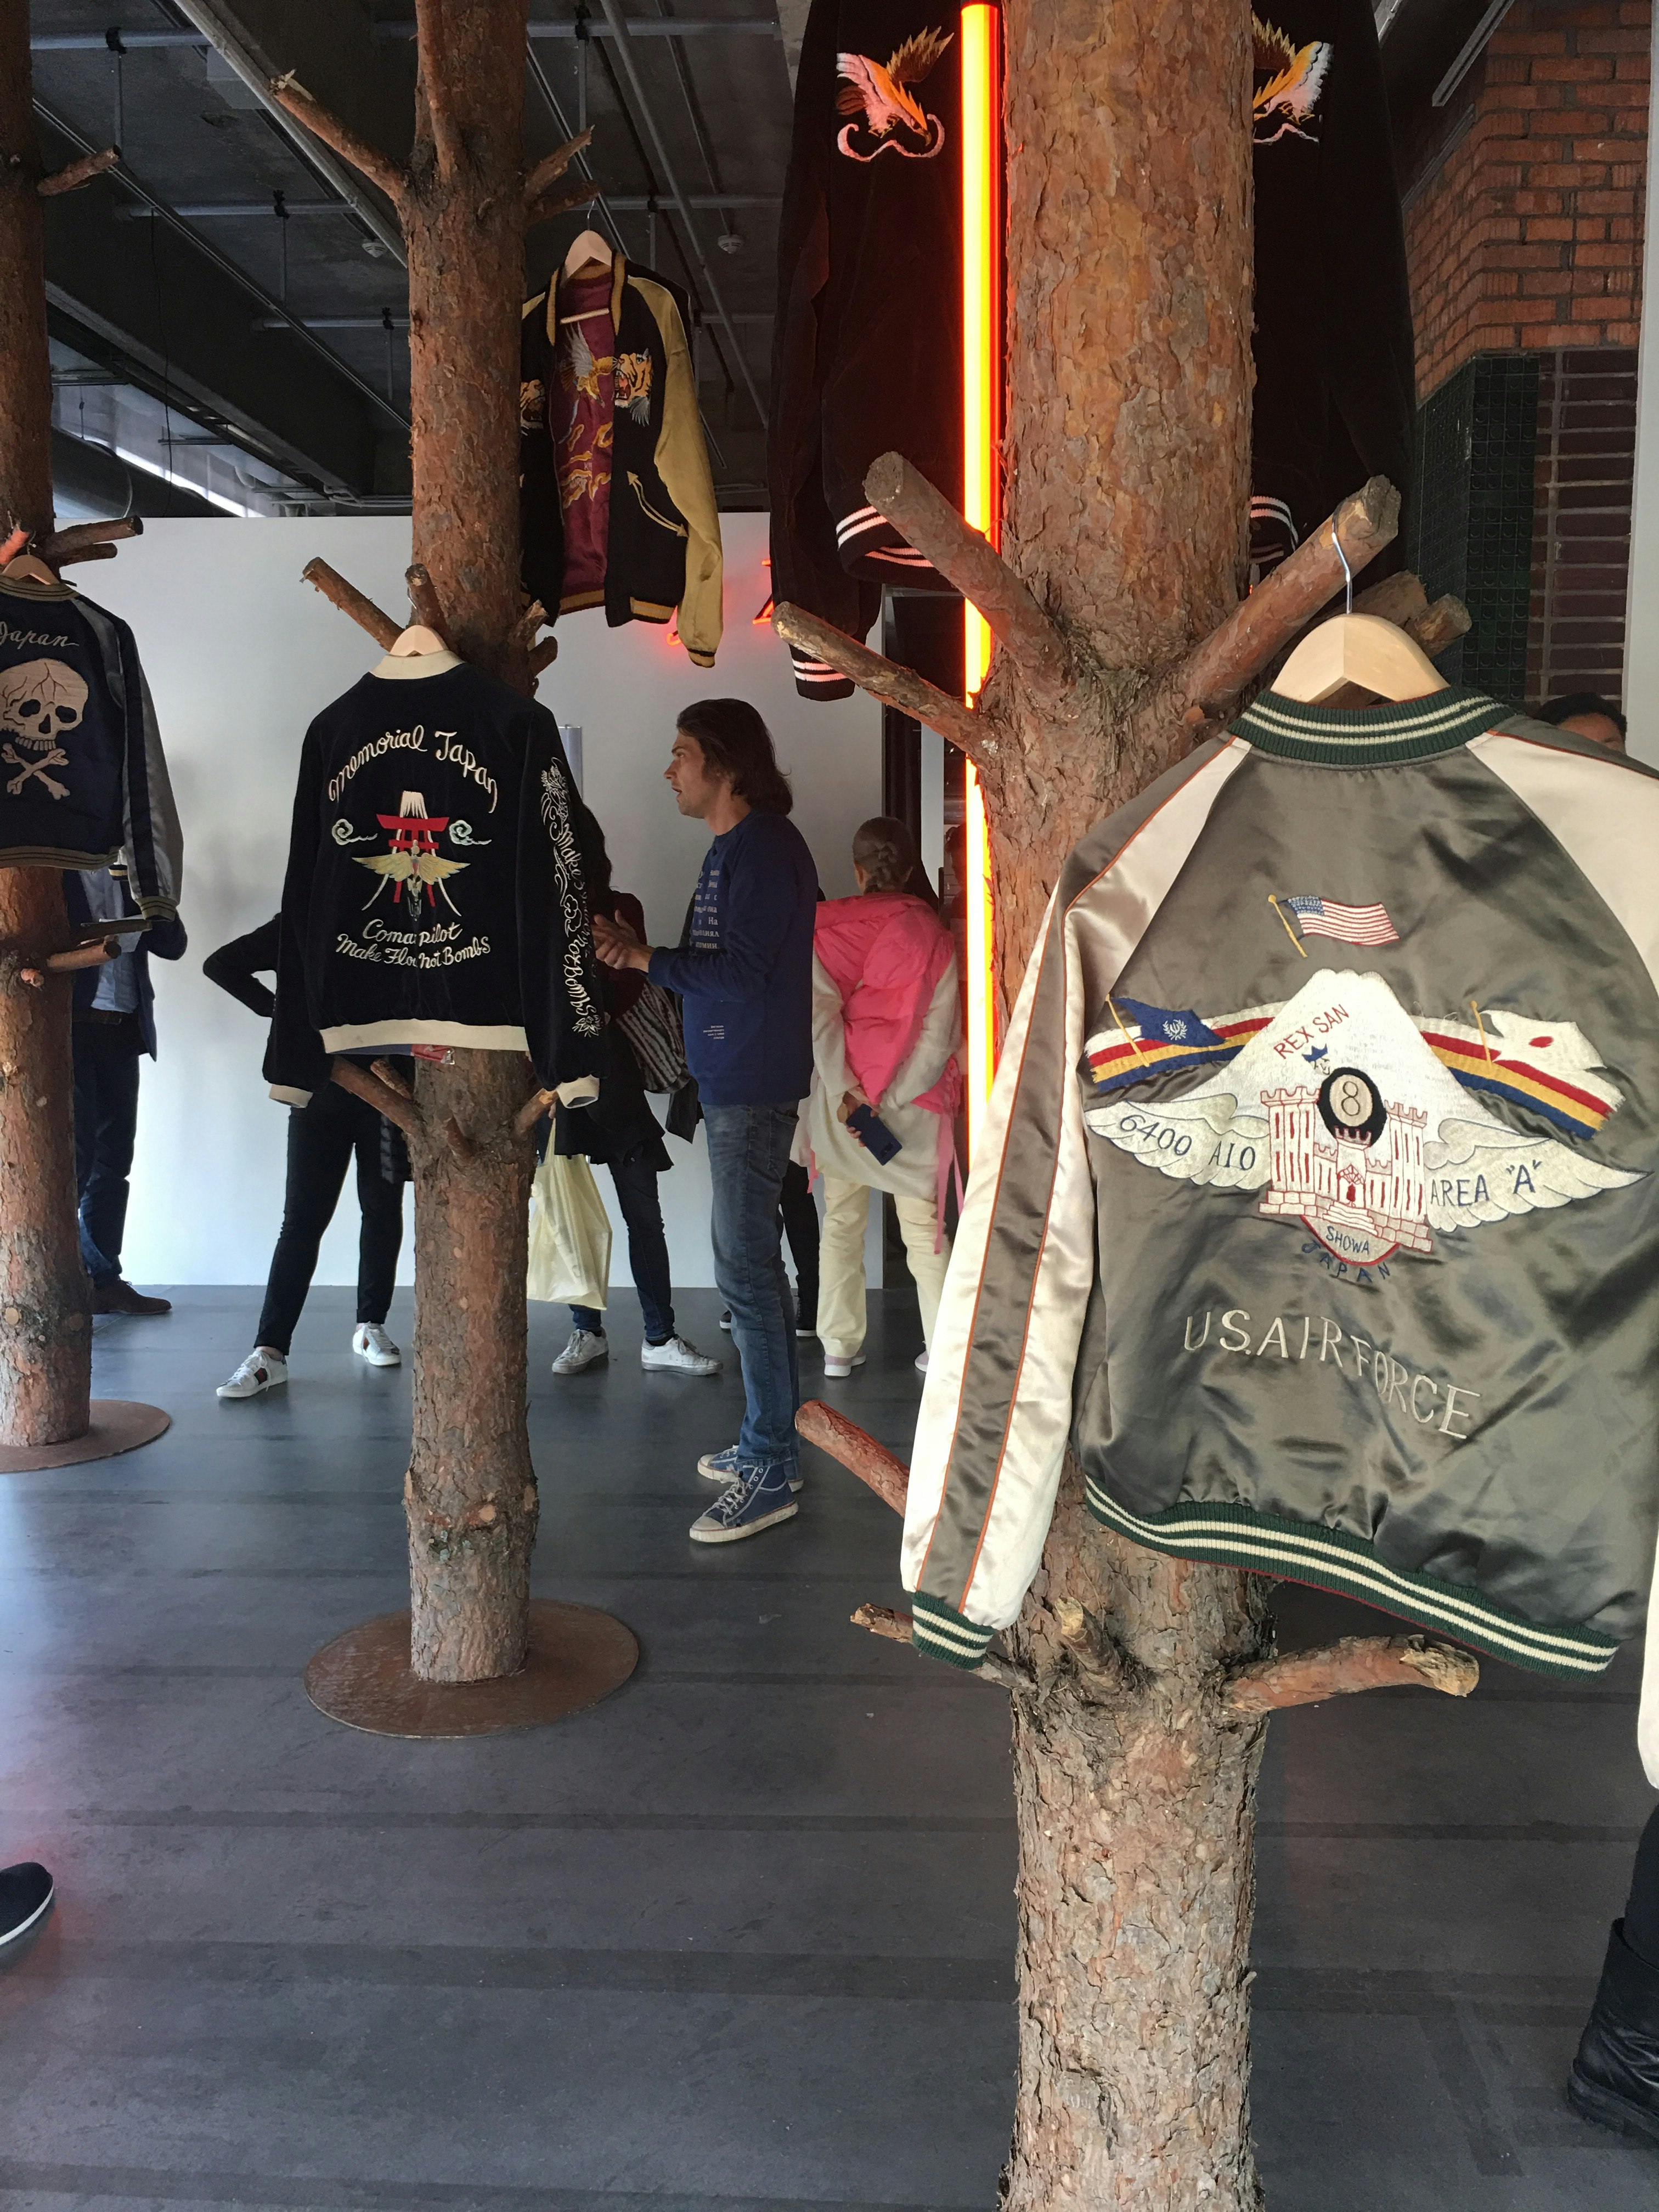 A U.S Air Force bomber jacket hanging on a tree branch in a gallery, surrounded by other embroidered bomber jackets hooked onto installed tree trunks.